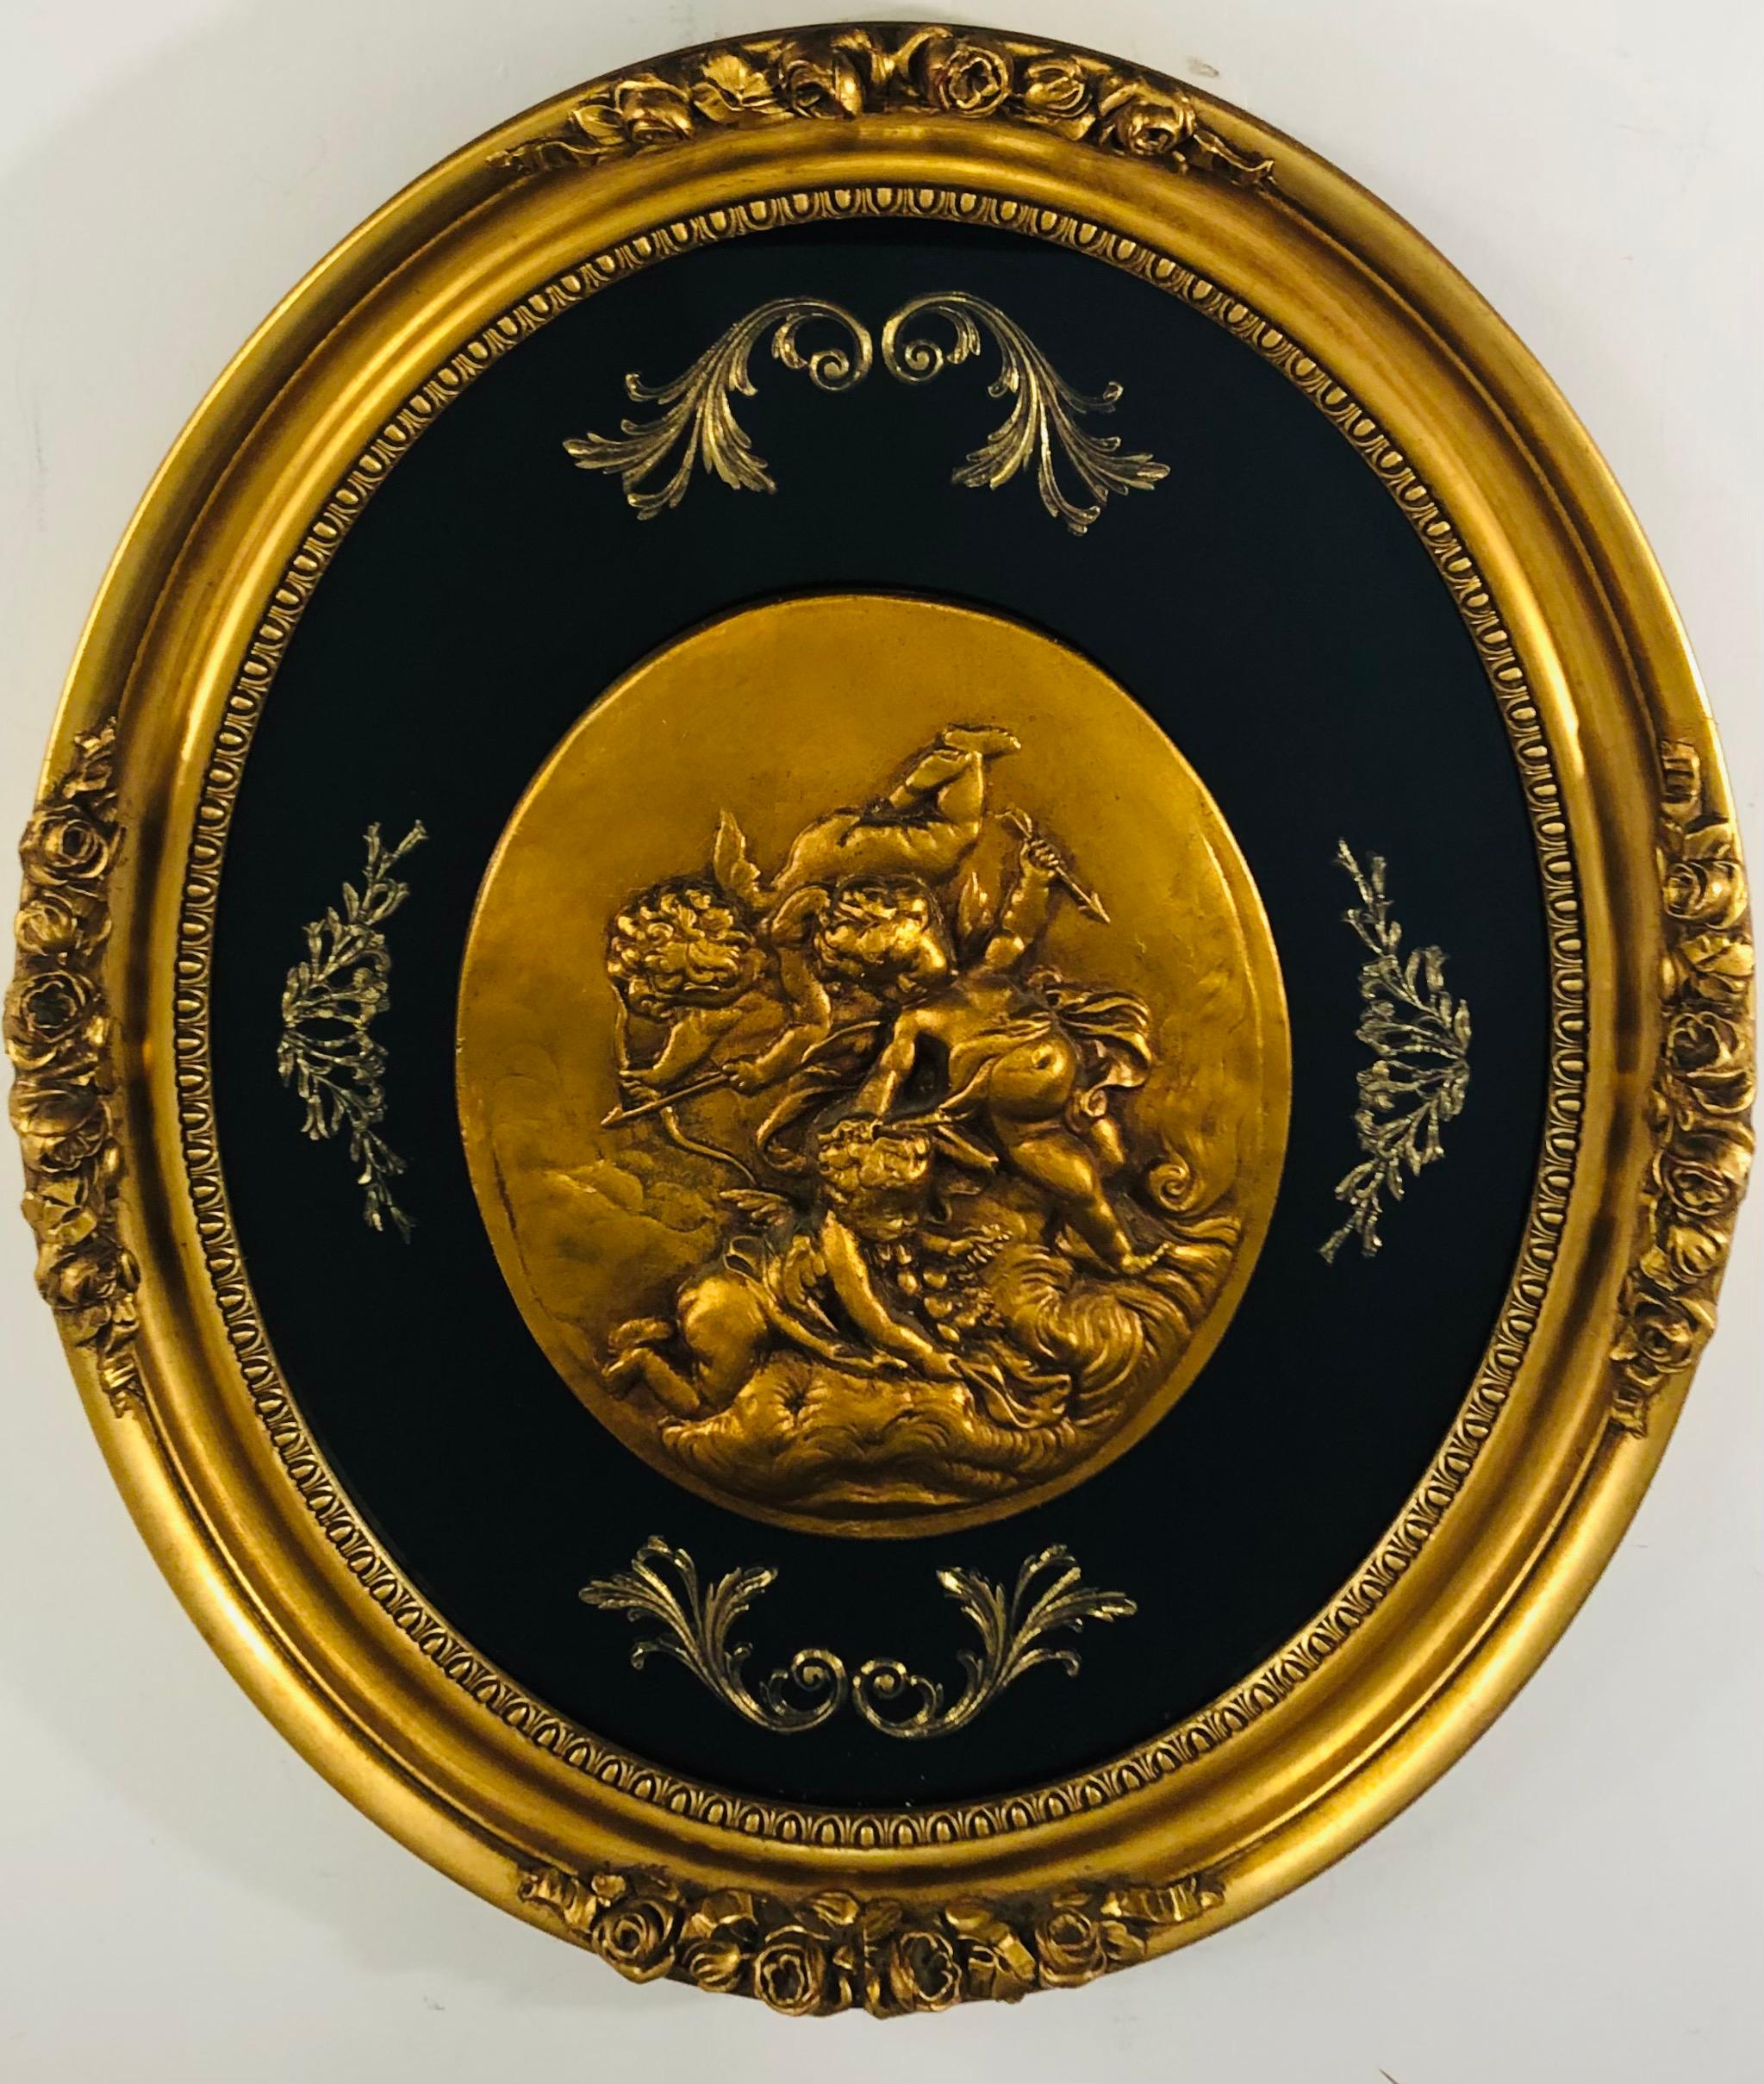 A classy and elegant hand painted oval plaque featuring winged cherubs holding arrows. The beautiful wall art is sculpted of wood and finely painted in gold. The cherubs are surrounded by black velvet background with bronze leaves design and a glass